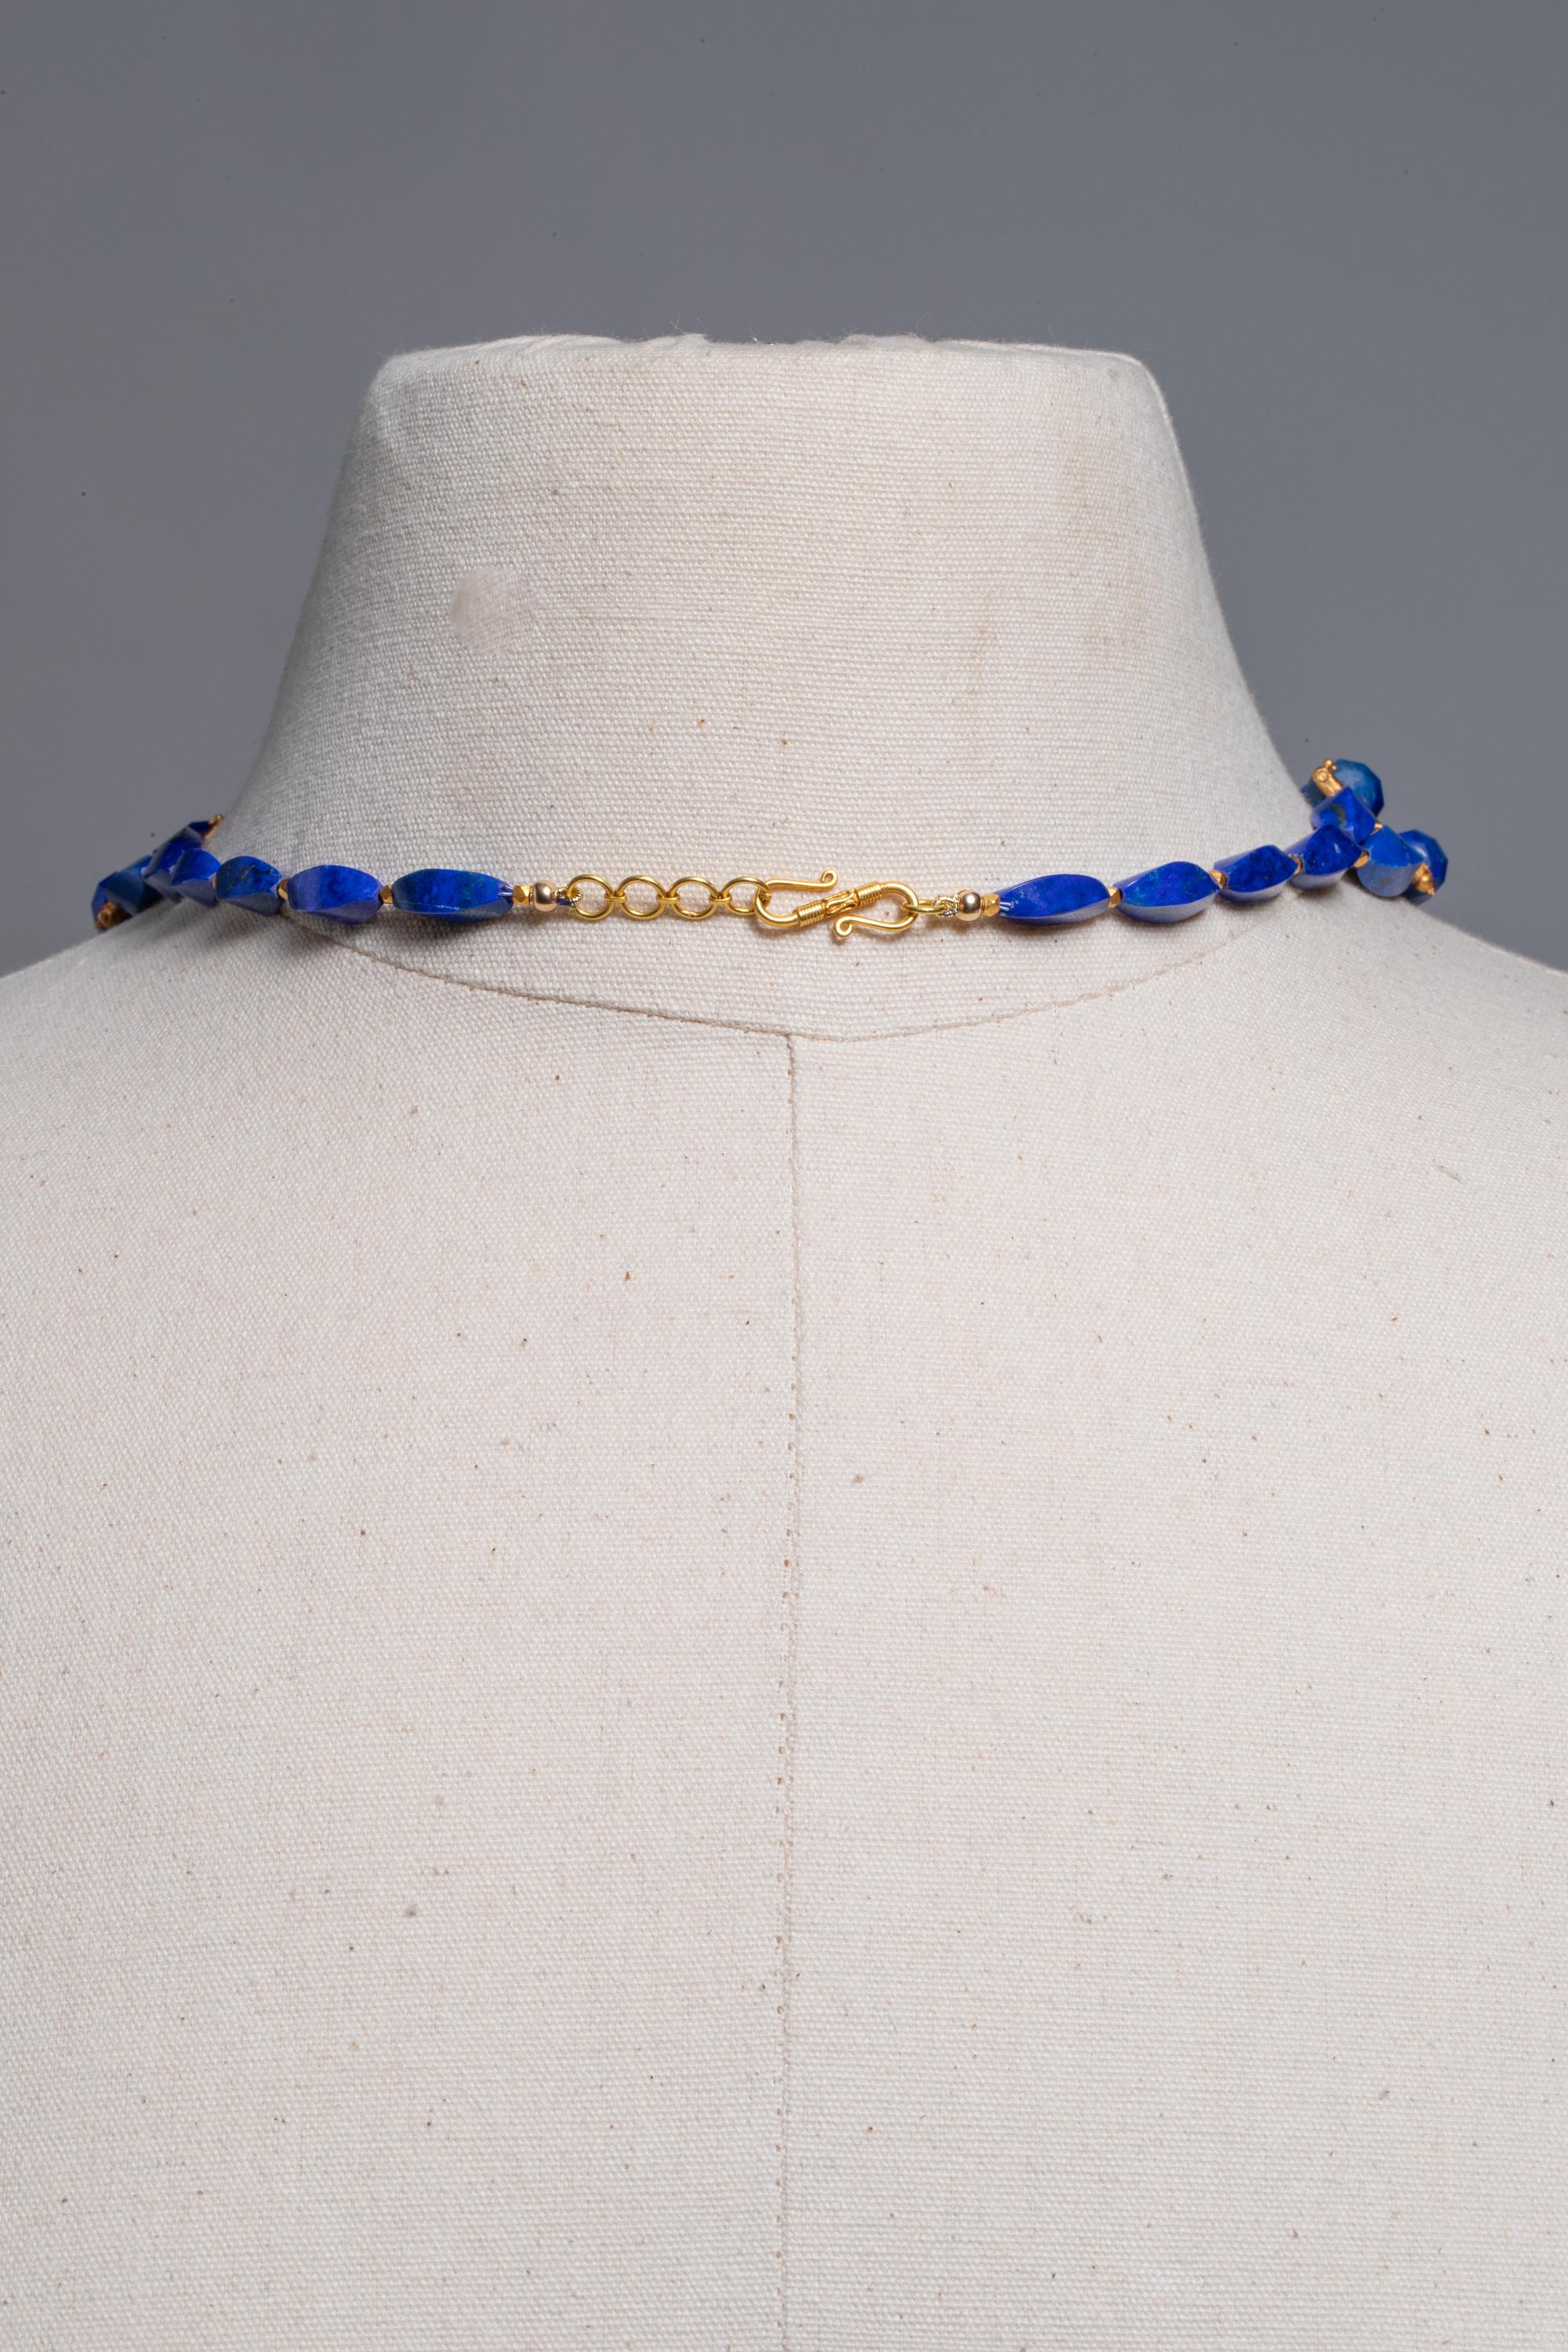 peacock blue necklace